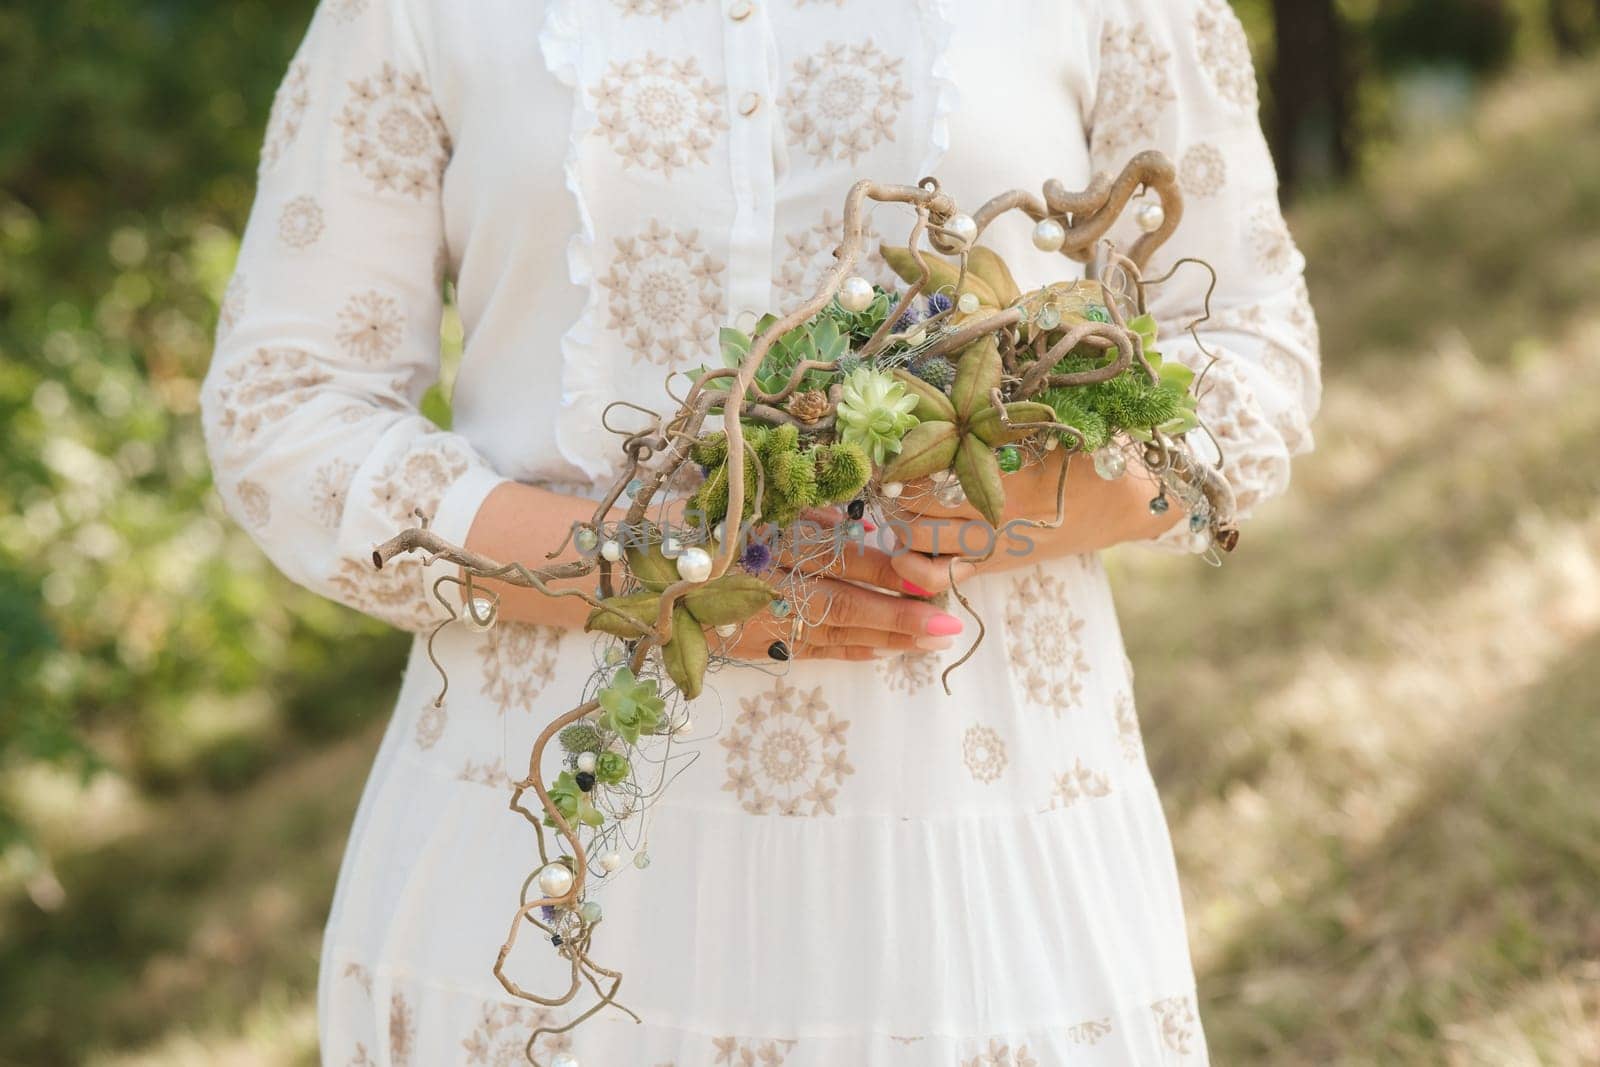 The bride holds an unusual braided wedding bouquet in her hands.